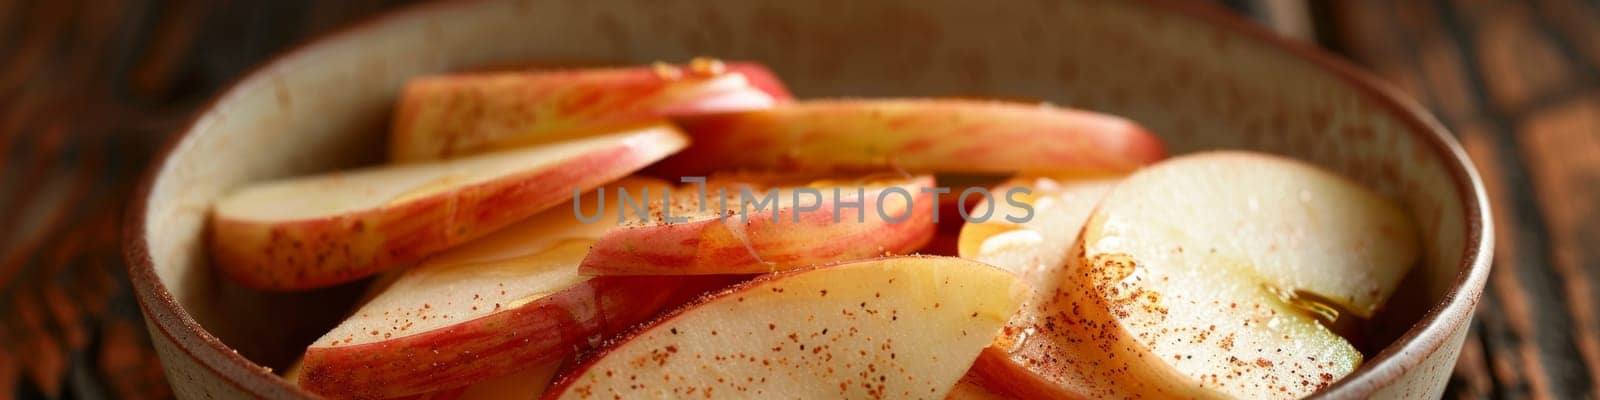 A bowl of sliced apples on a wooden table with brown background, AI by starush